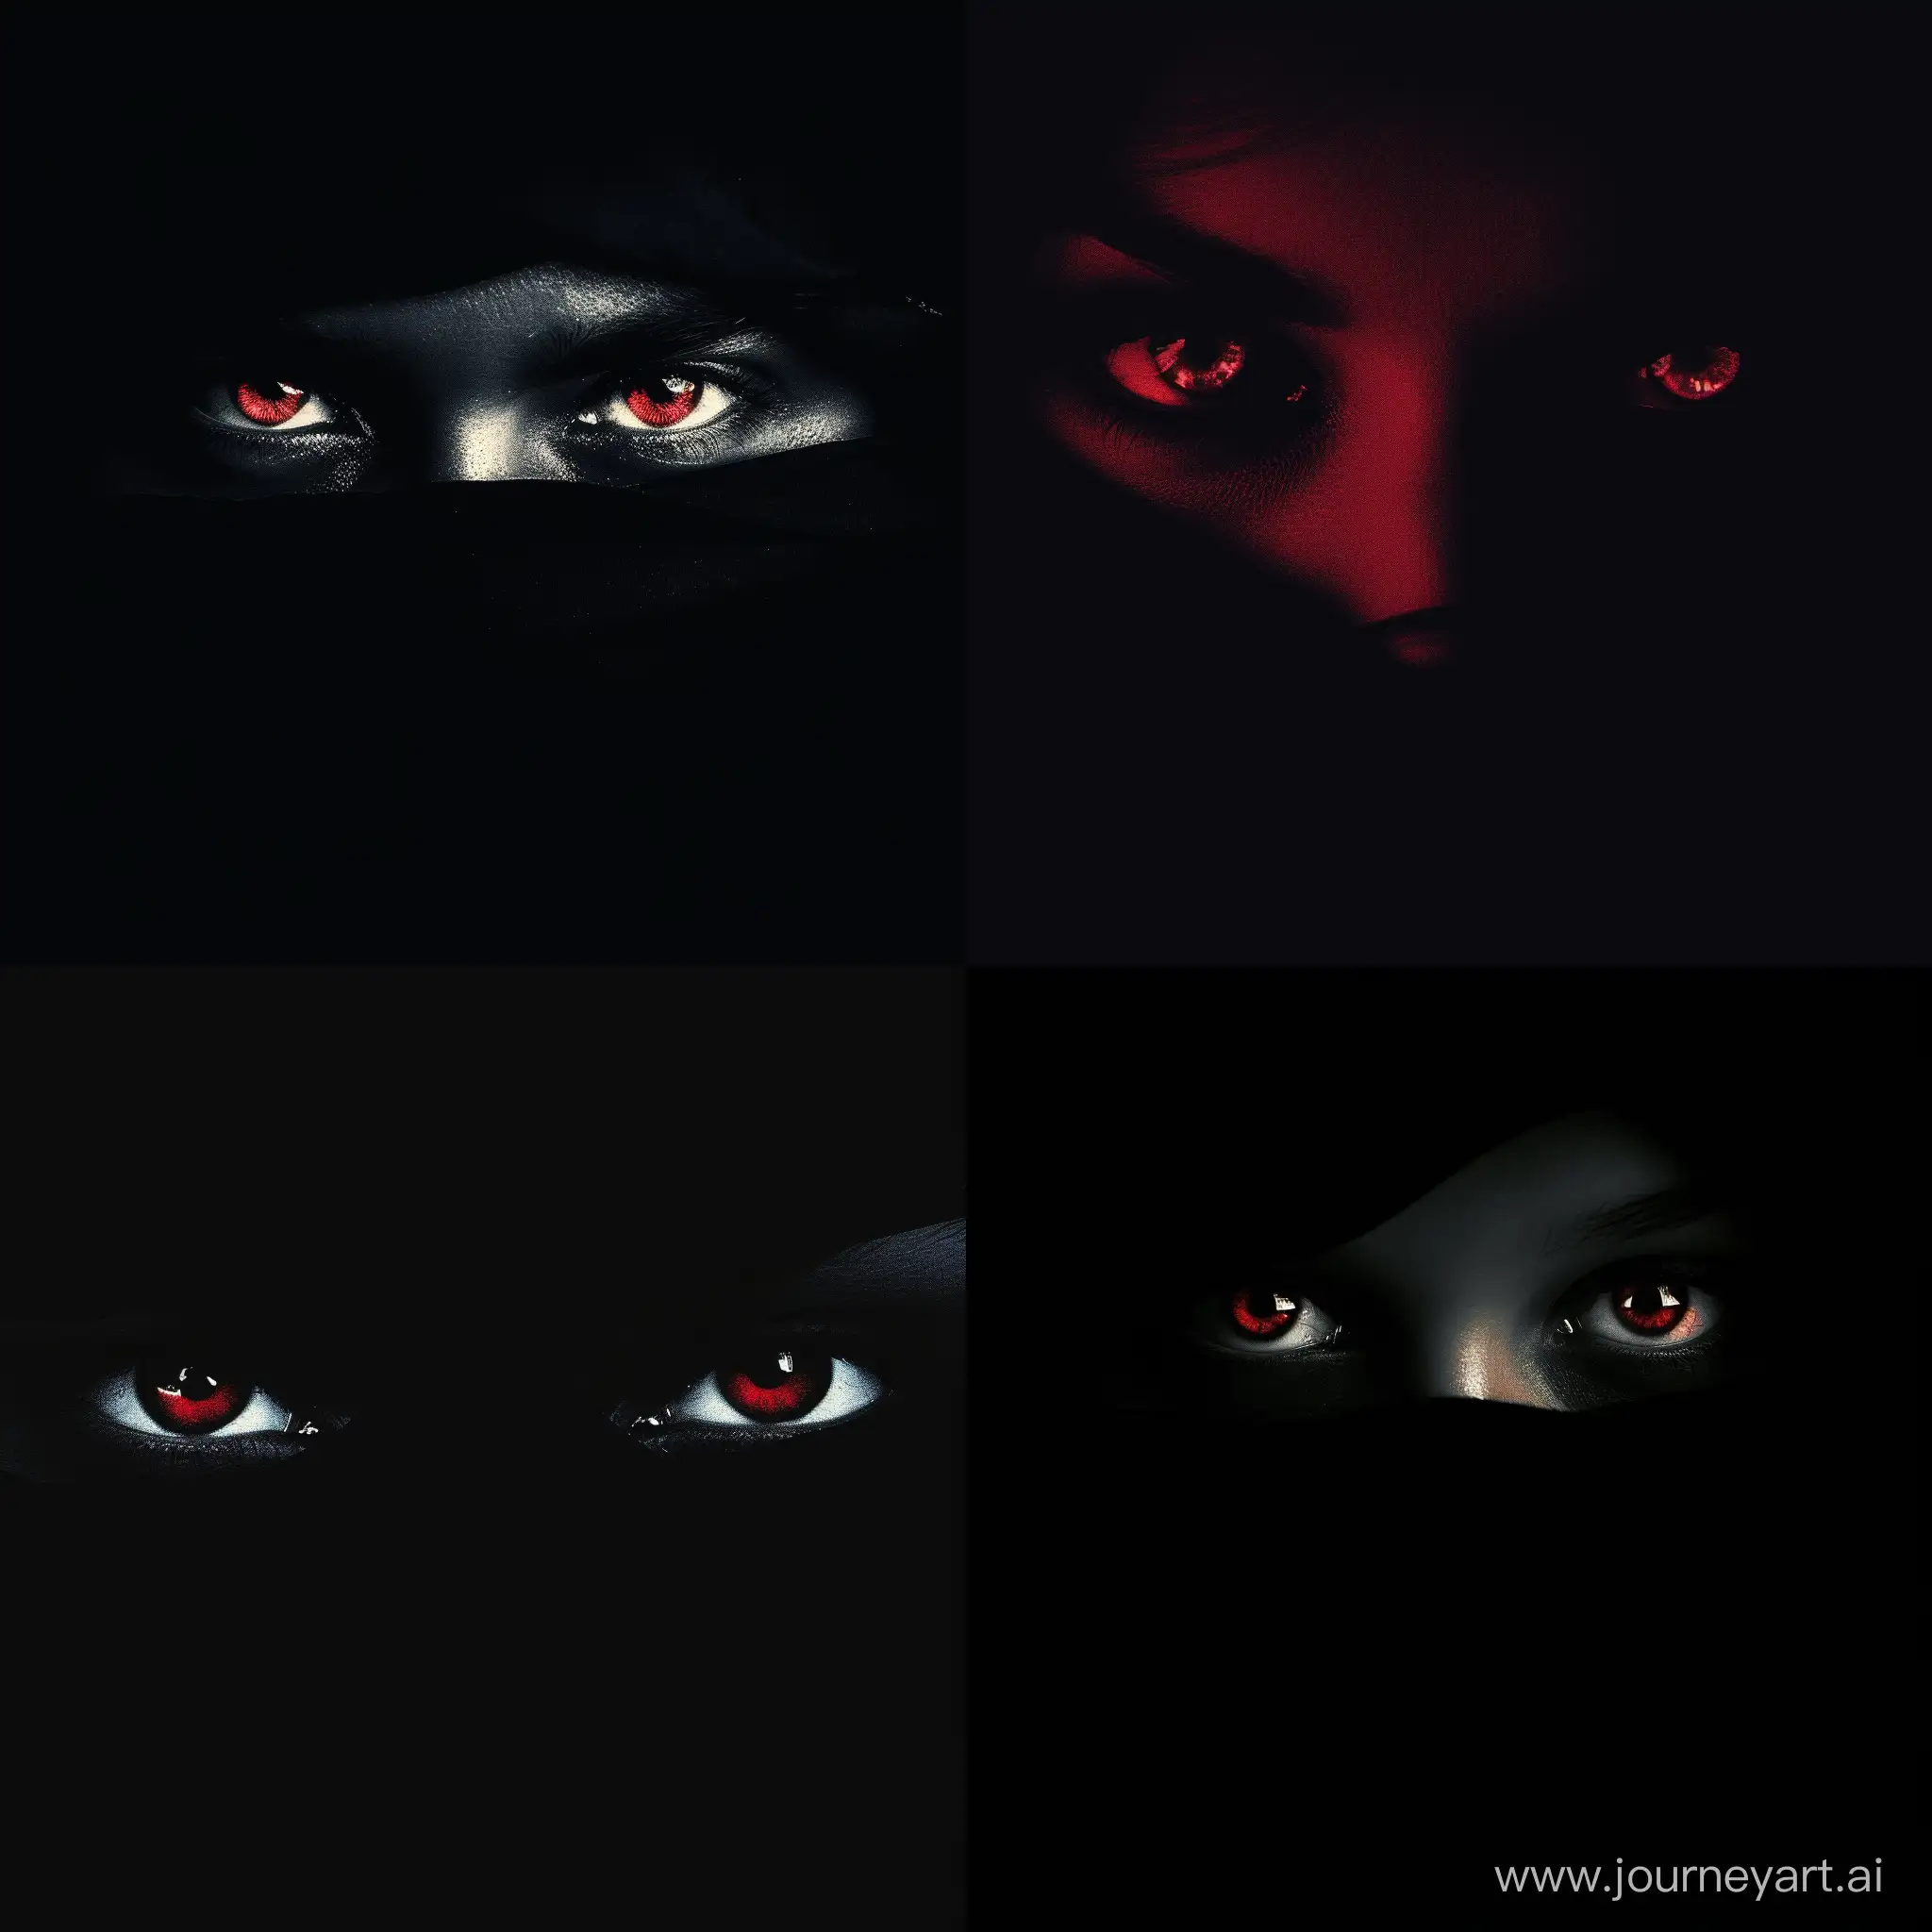 Mysterious-Red-Eyes-in-Minimalistic-Darkness